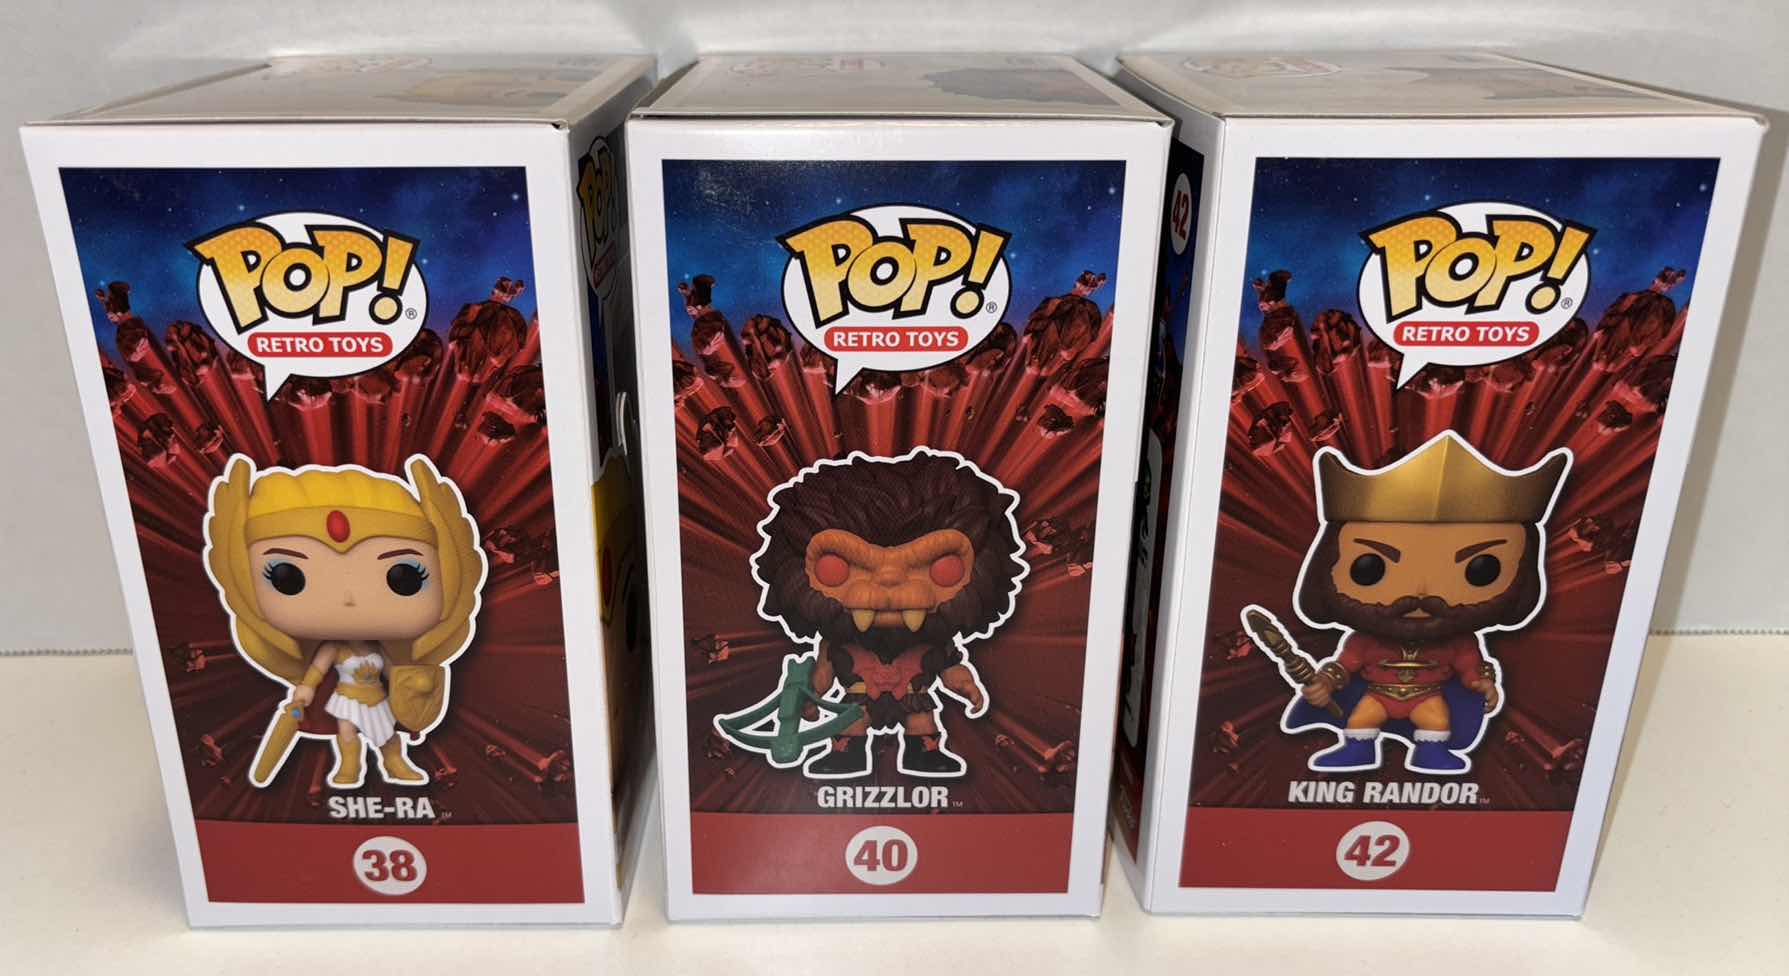 Photo 2 of NEW FUNKO POP! RETRO TOYS VINYL FIGURE MIXED 6-PACK, MASTERS OF THE UNIVERSE #38 SHE-RA GLOW IN THE DARK LIMITED EDITION EXCLUSIVE SPECIALTY SERIES (2), #40 GRIZZLOR (2) & #42 KING RANDOR (2)